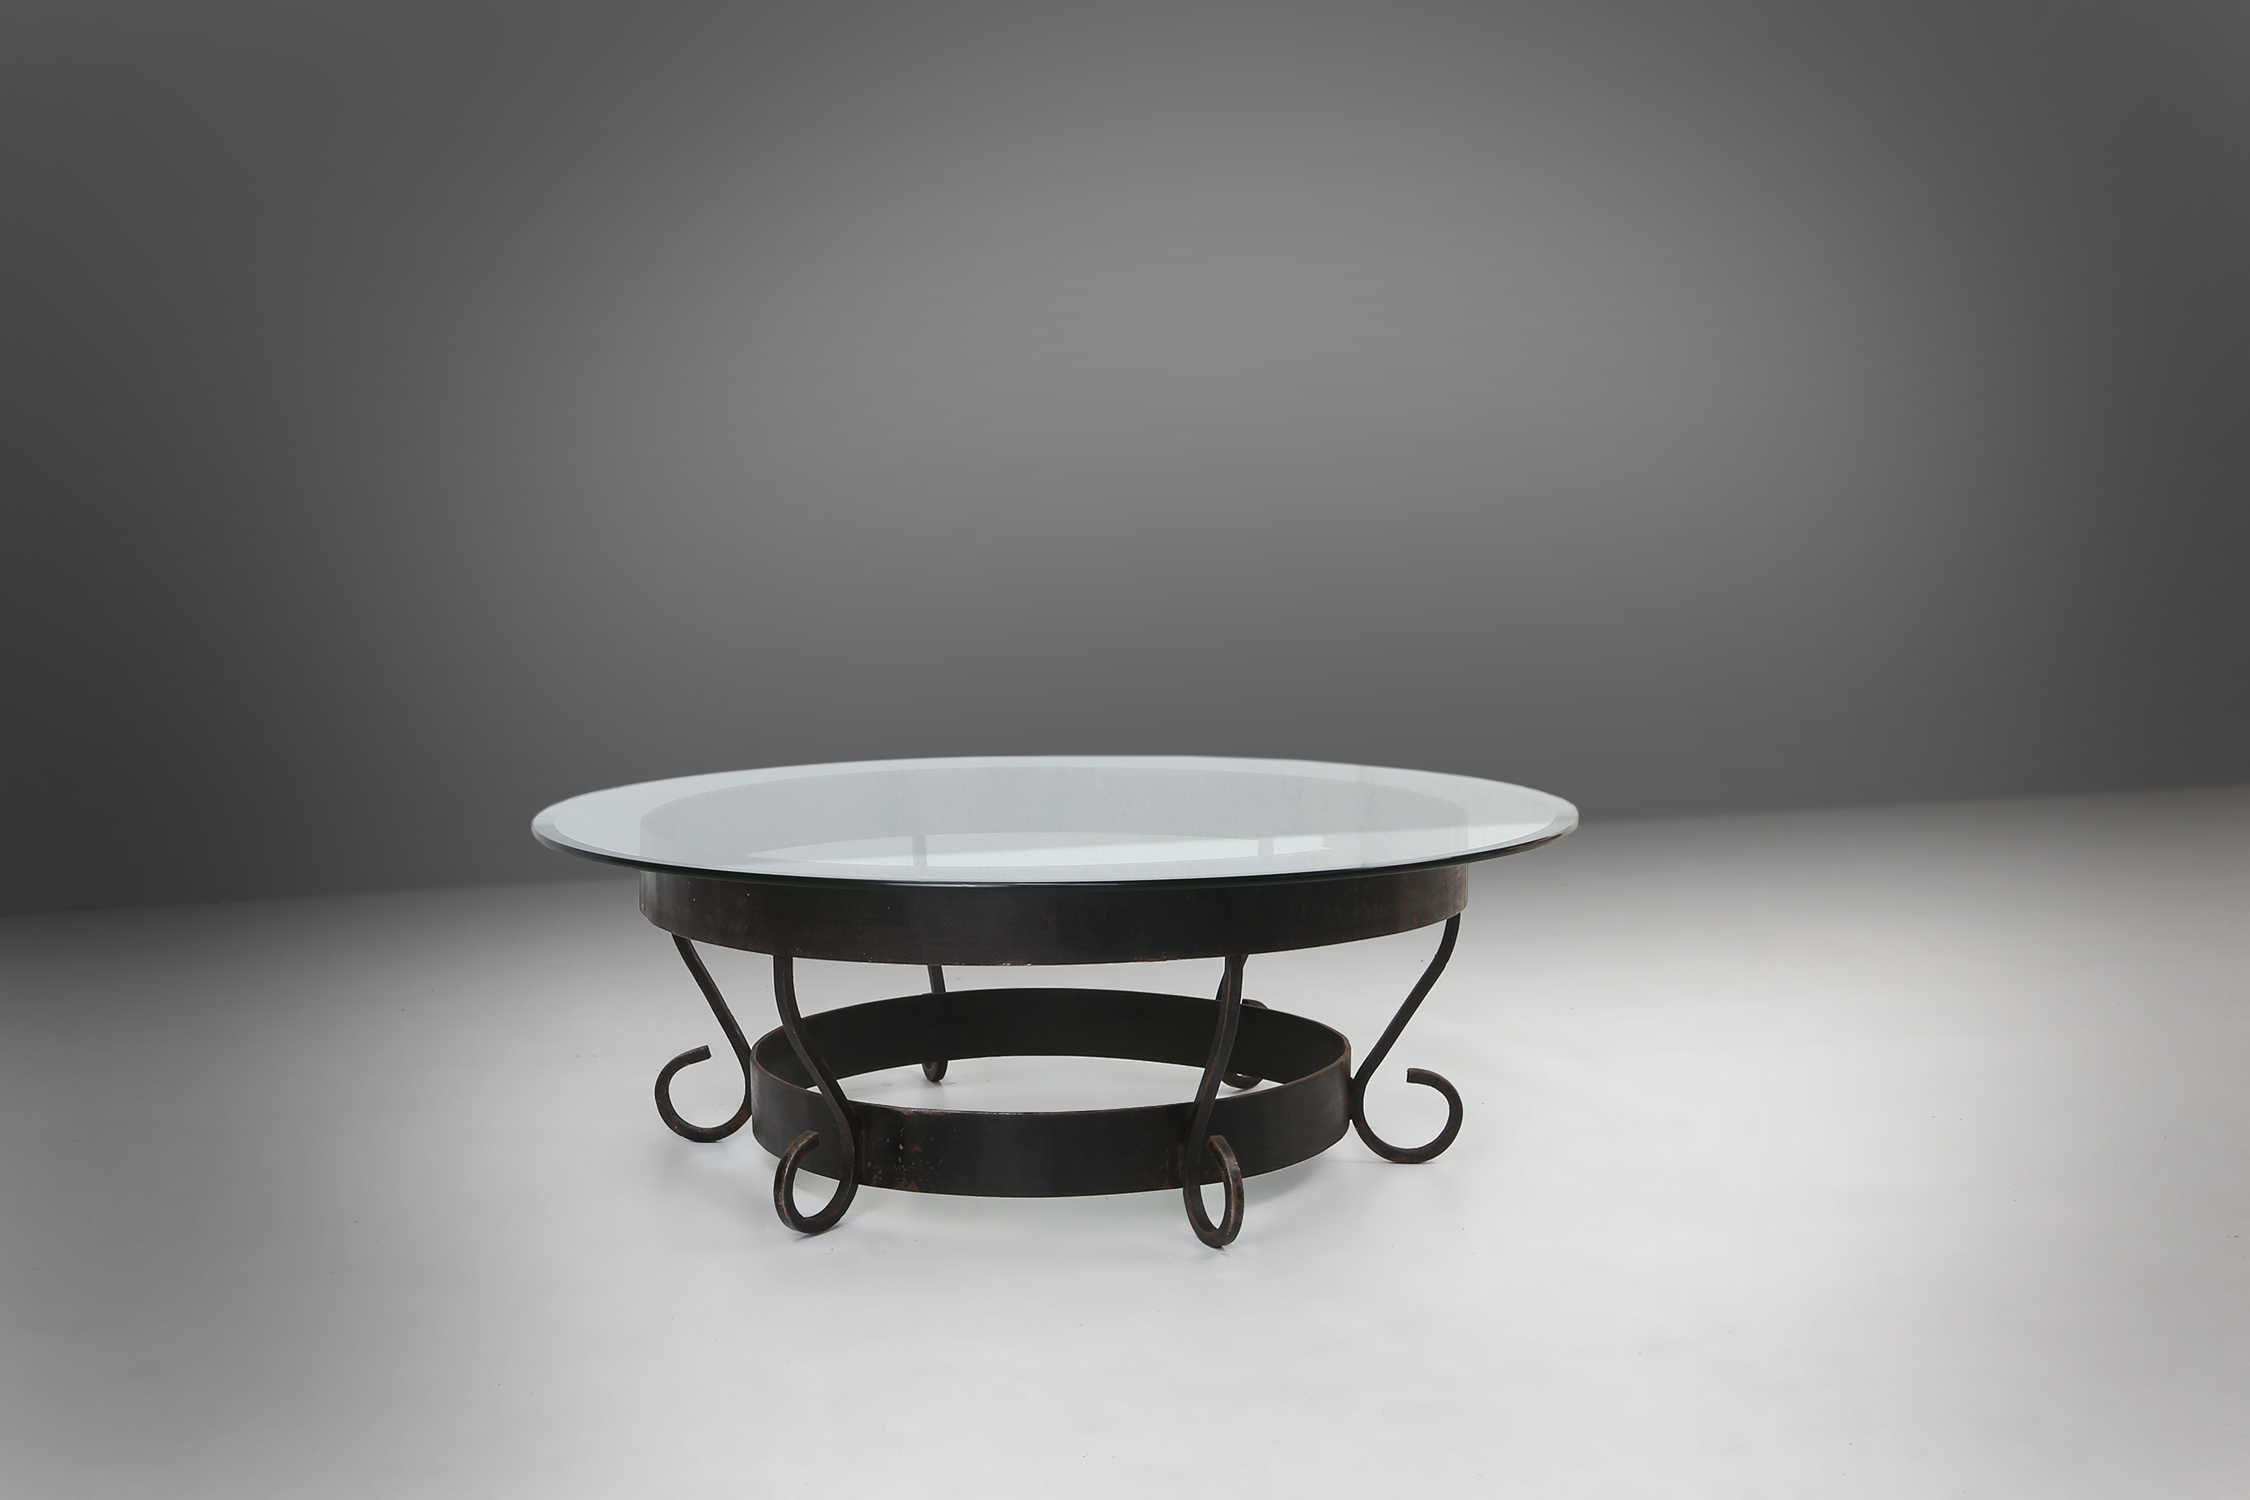 Rustic Round Coffee Table with Wrought Iron Base and Glass Top, France, 1930sthumbnail